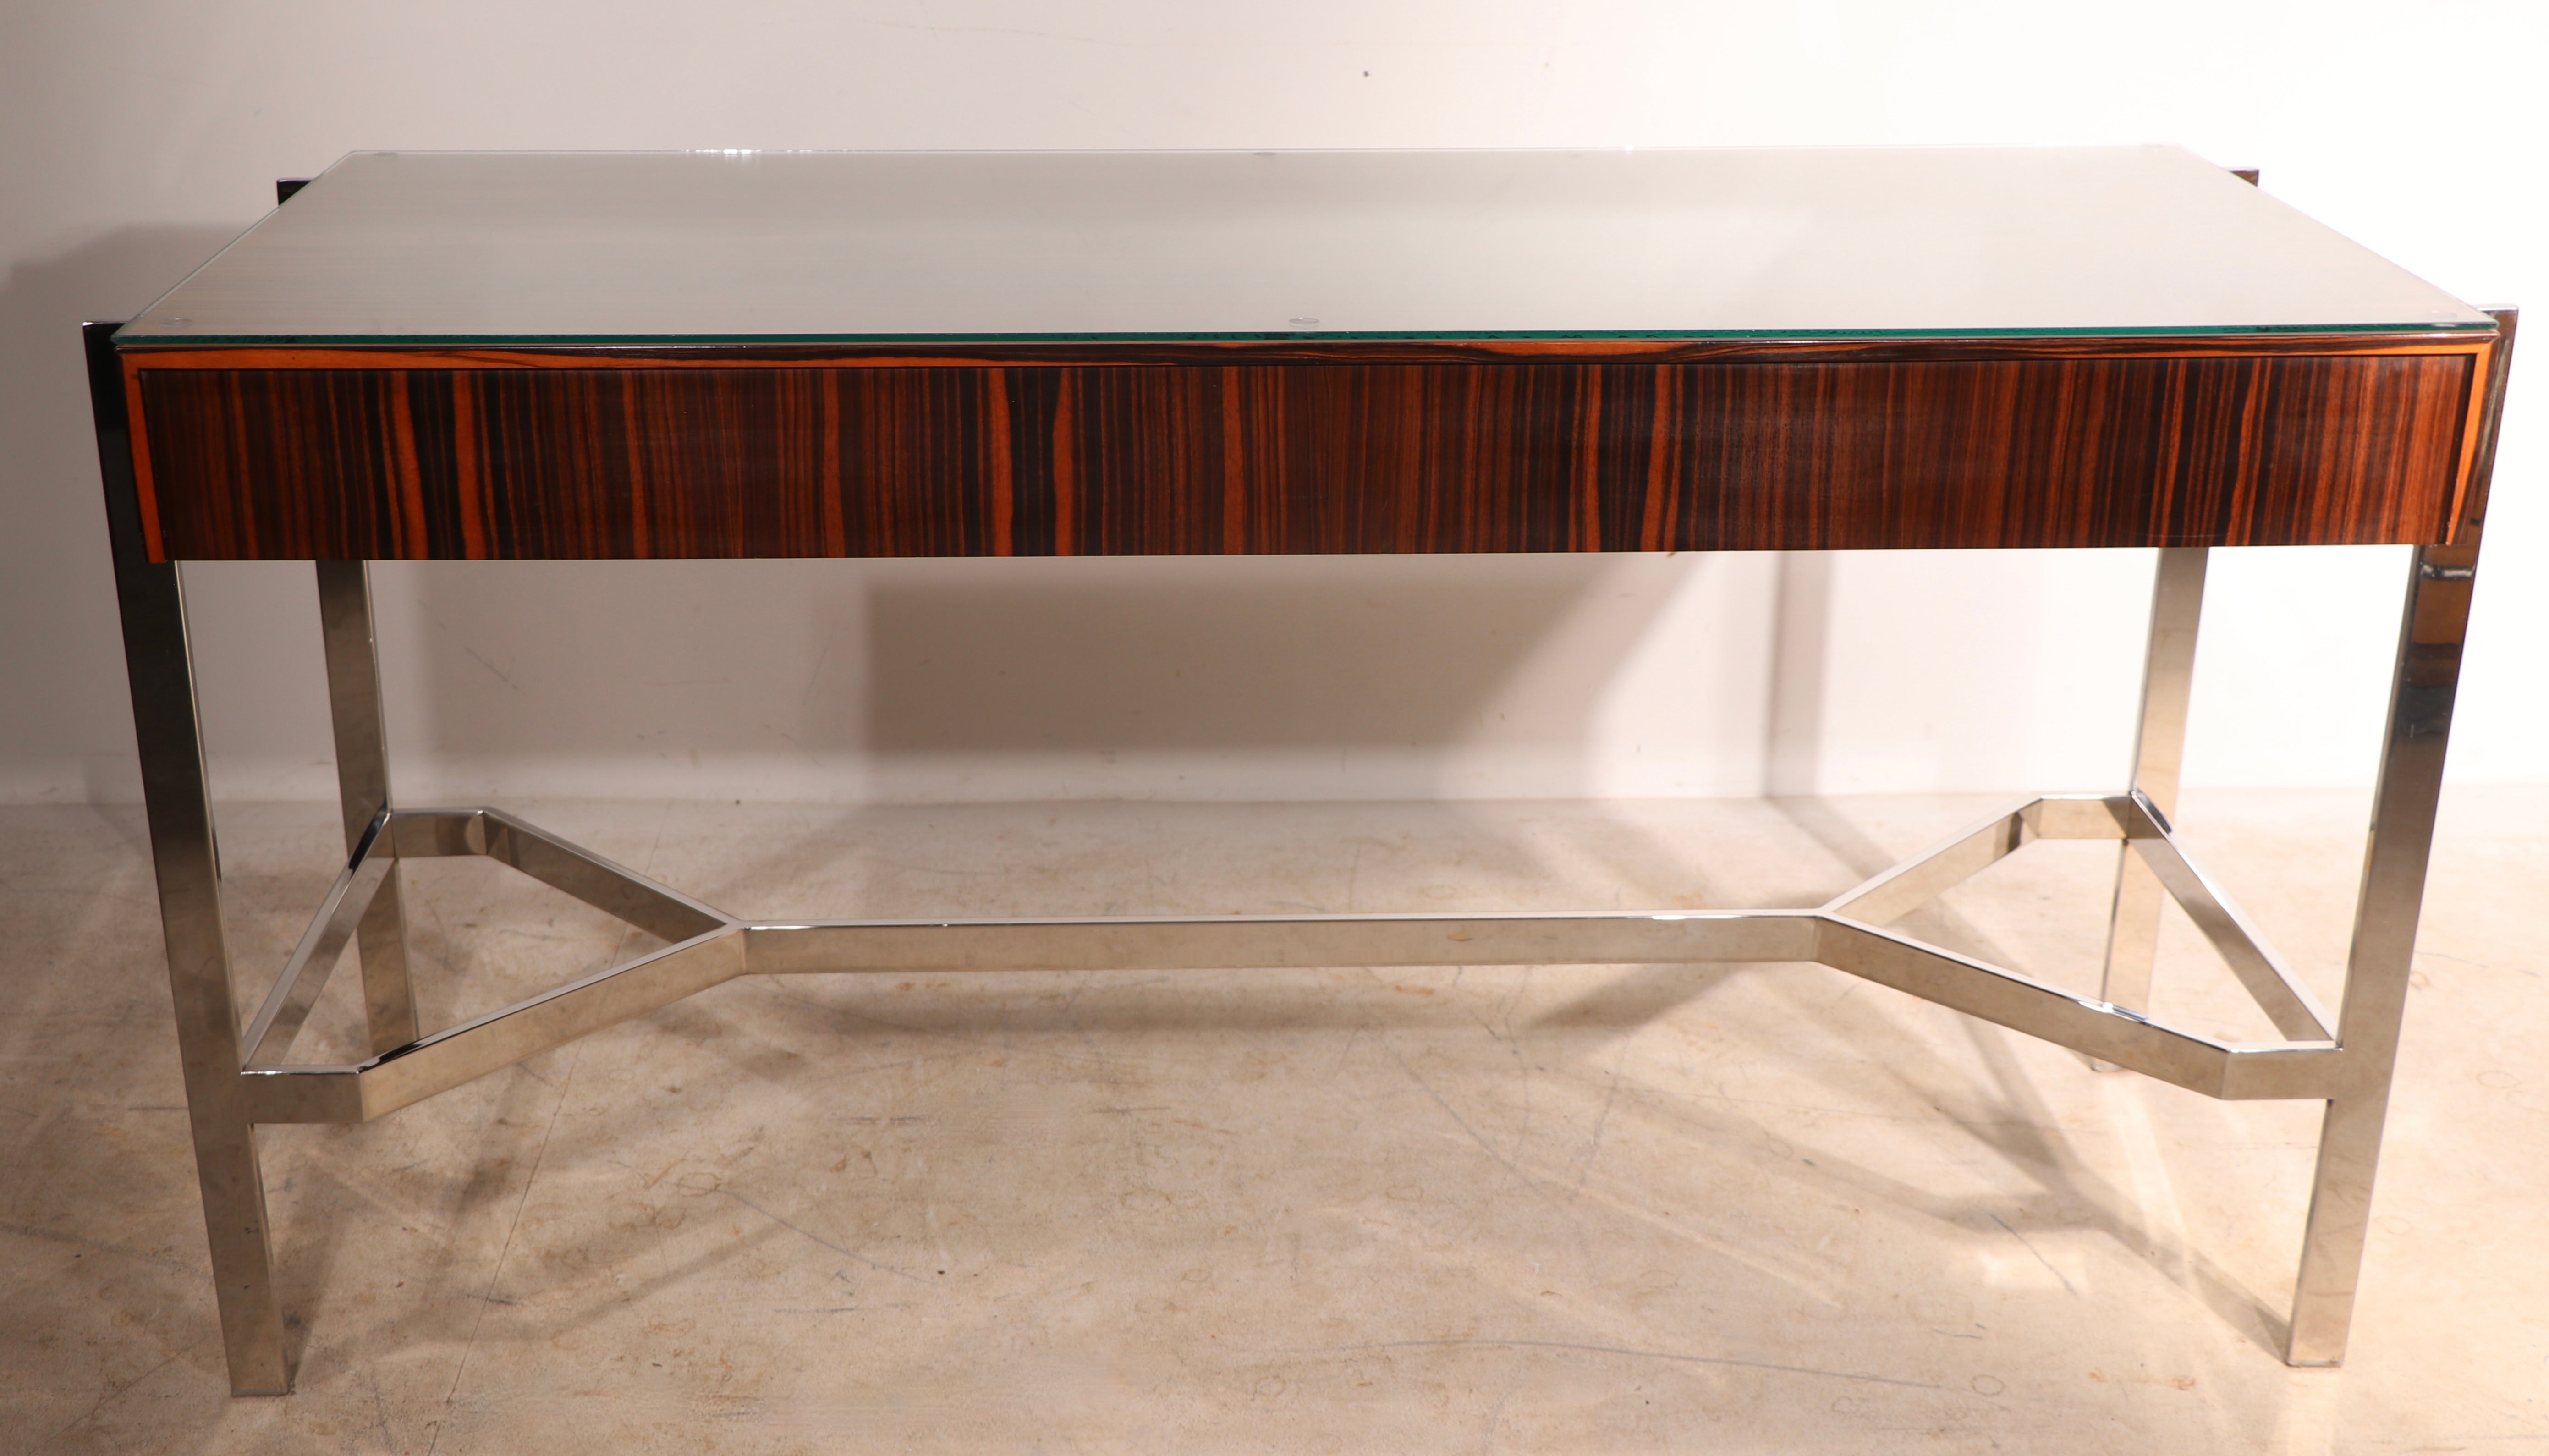 High style 1970’s writing desk, of stunning zebra wood veneer, on an architectural bright chrome frame.
The rectangular wood element features three pull out drawers, it is 5 in. H.
This fabulous desk was originally purchased at the chic and famous